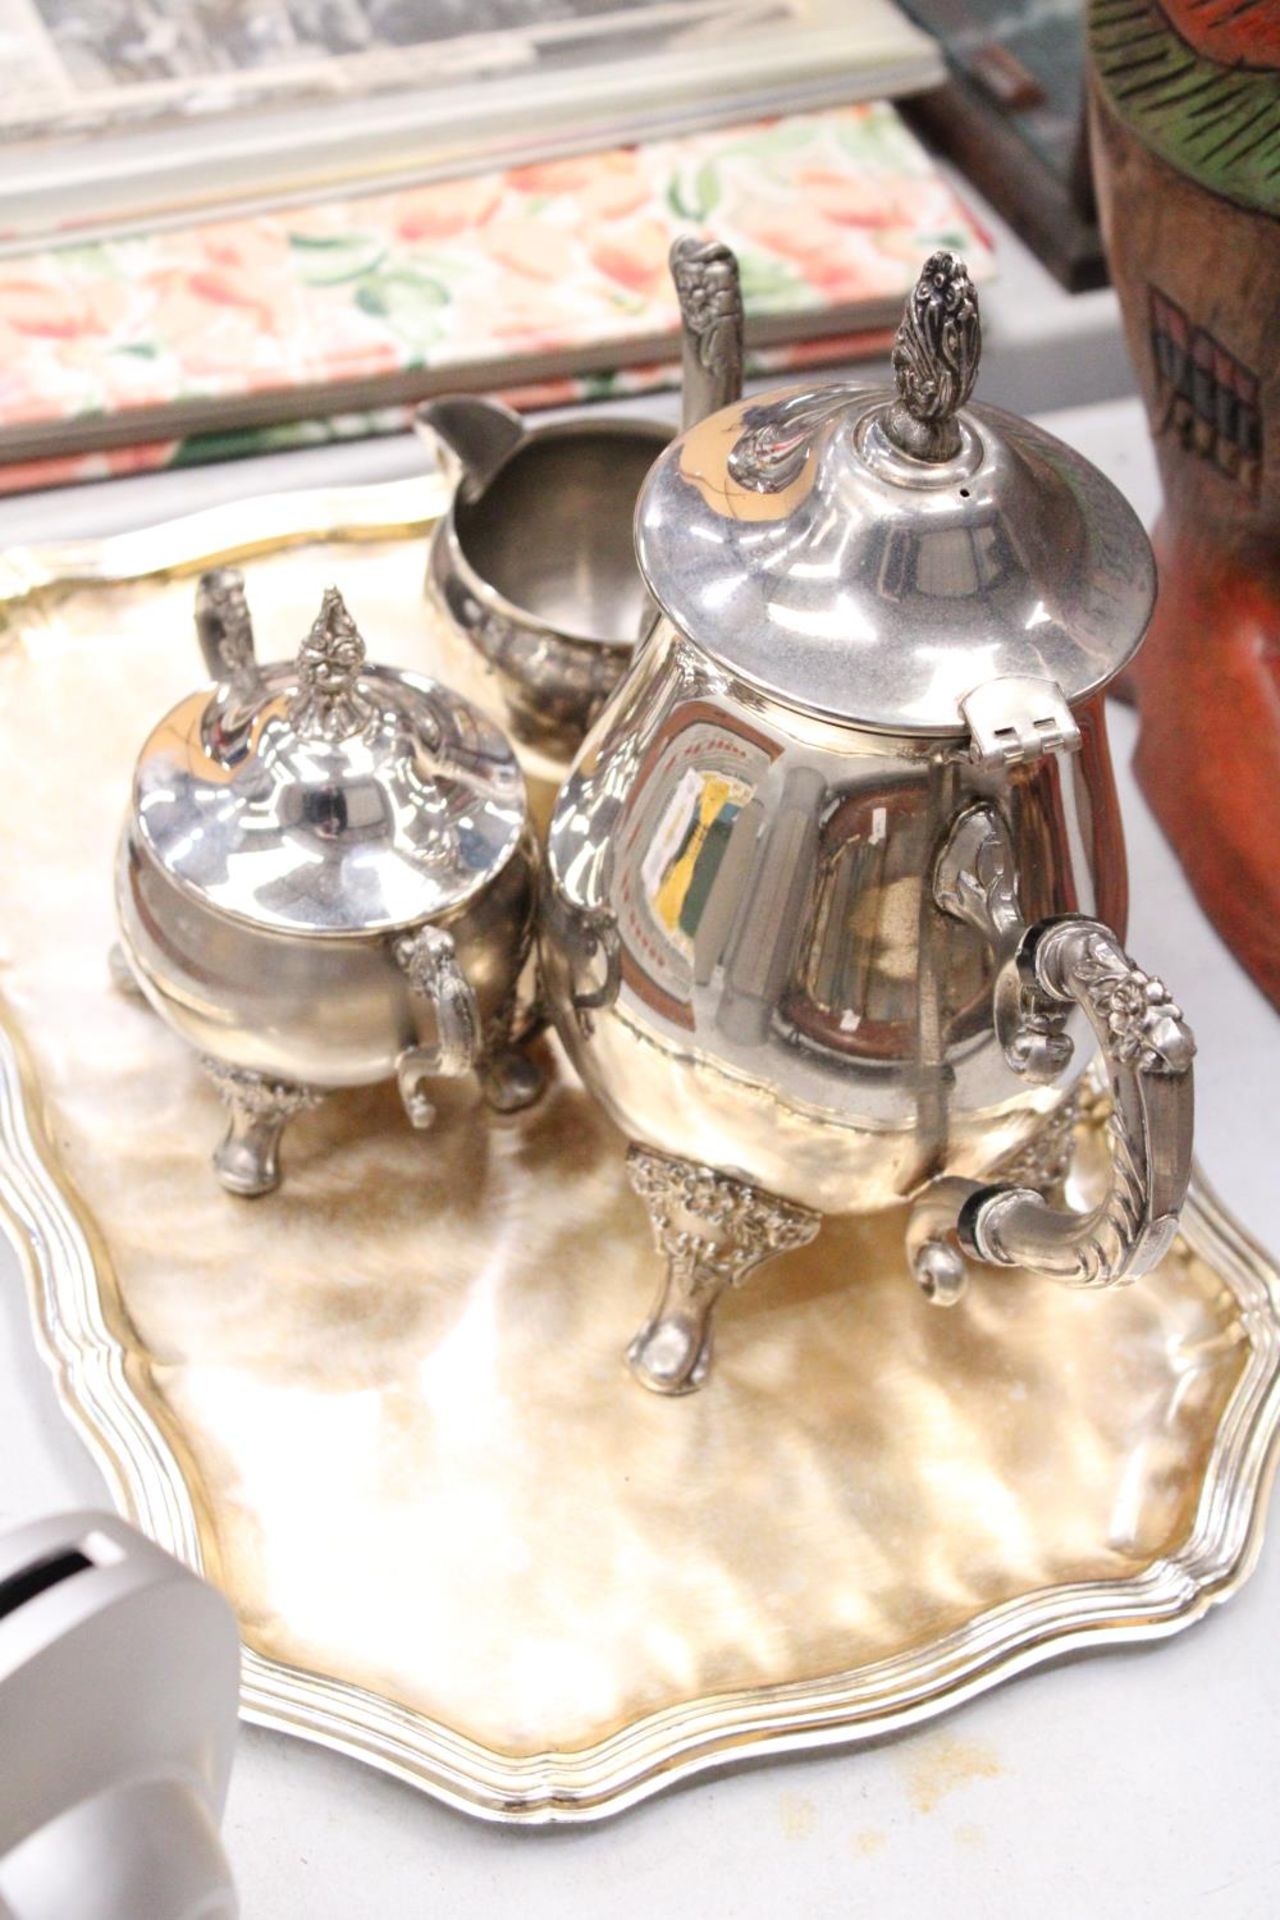 A VINTAGE SILVER PLATED COFFEE POT, MILK JUG AND SUGAR BOWL ON A TRAY - Image 4 of 4